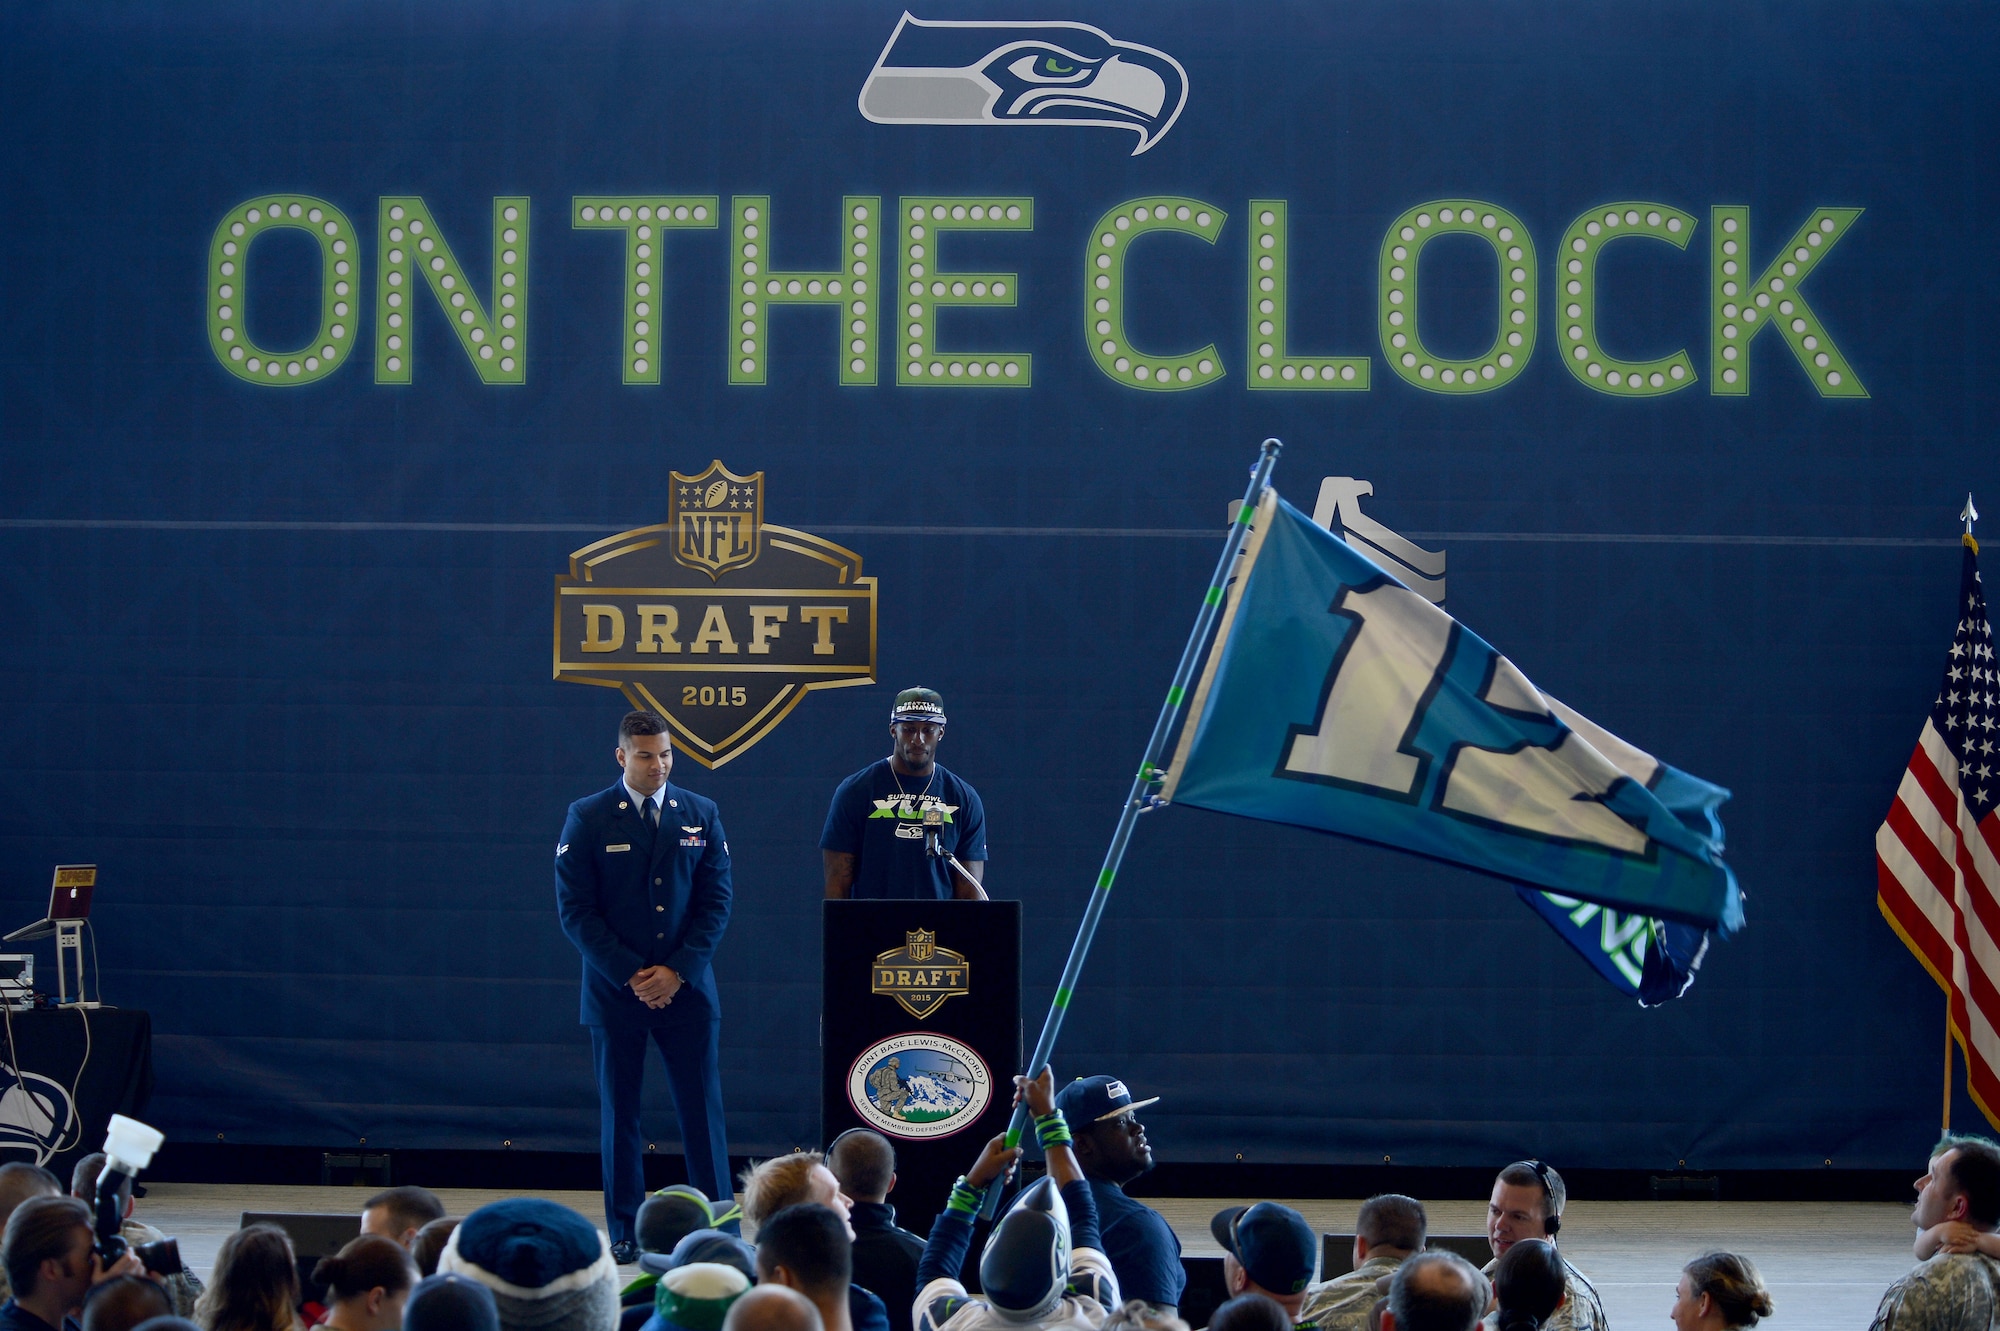 Airman 1st Class Michael Andrews (left), 10th Airlift Squadron loadmaster, stands next to Douglas McNeil, Seattle Seahawks wide receiver, before he announces this year’s draft pick May 2, 2015, during the Seattle Seahawks draft day event at Joint Base Lewis-McChord, Wash. During the event, the Seahawks selected a service member from each military branch to announce their picks for this year. (U.S. Air Force photo/Airman 1st Class Keoni Chavarria)